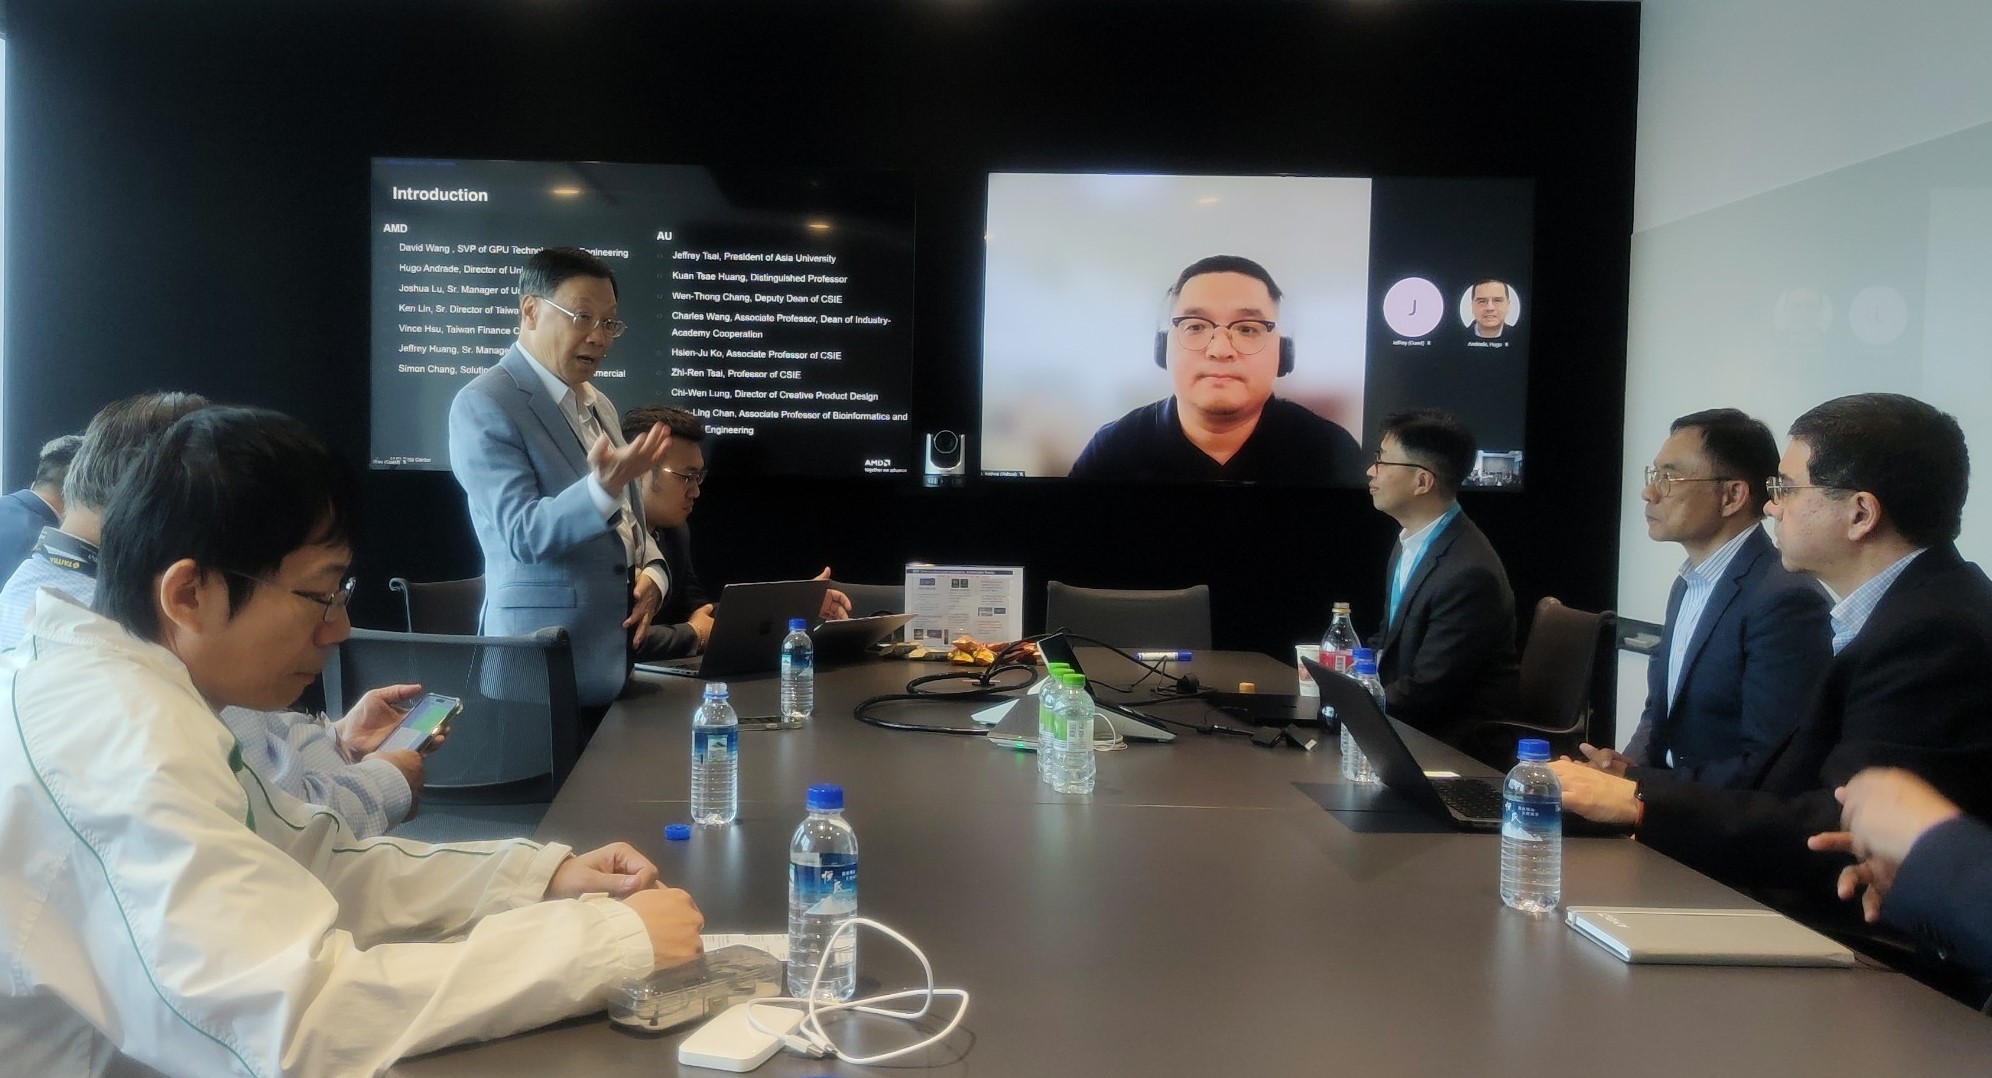 President Jeffrey J.P. Tsai of Asia University (left) introduces members of the Asia University AI team and presents research progress to AMD Senior Vice President David Wang (2nd from right) and others